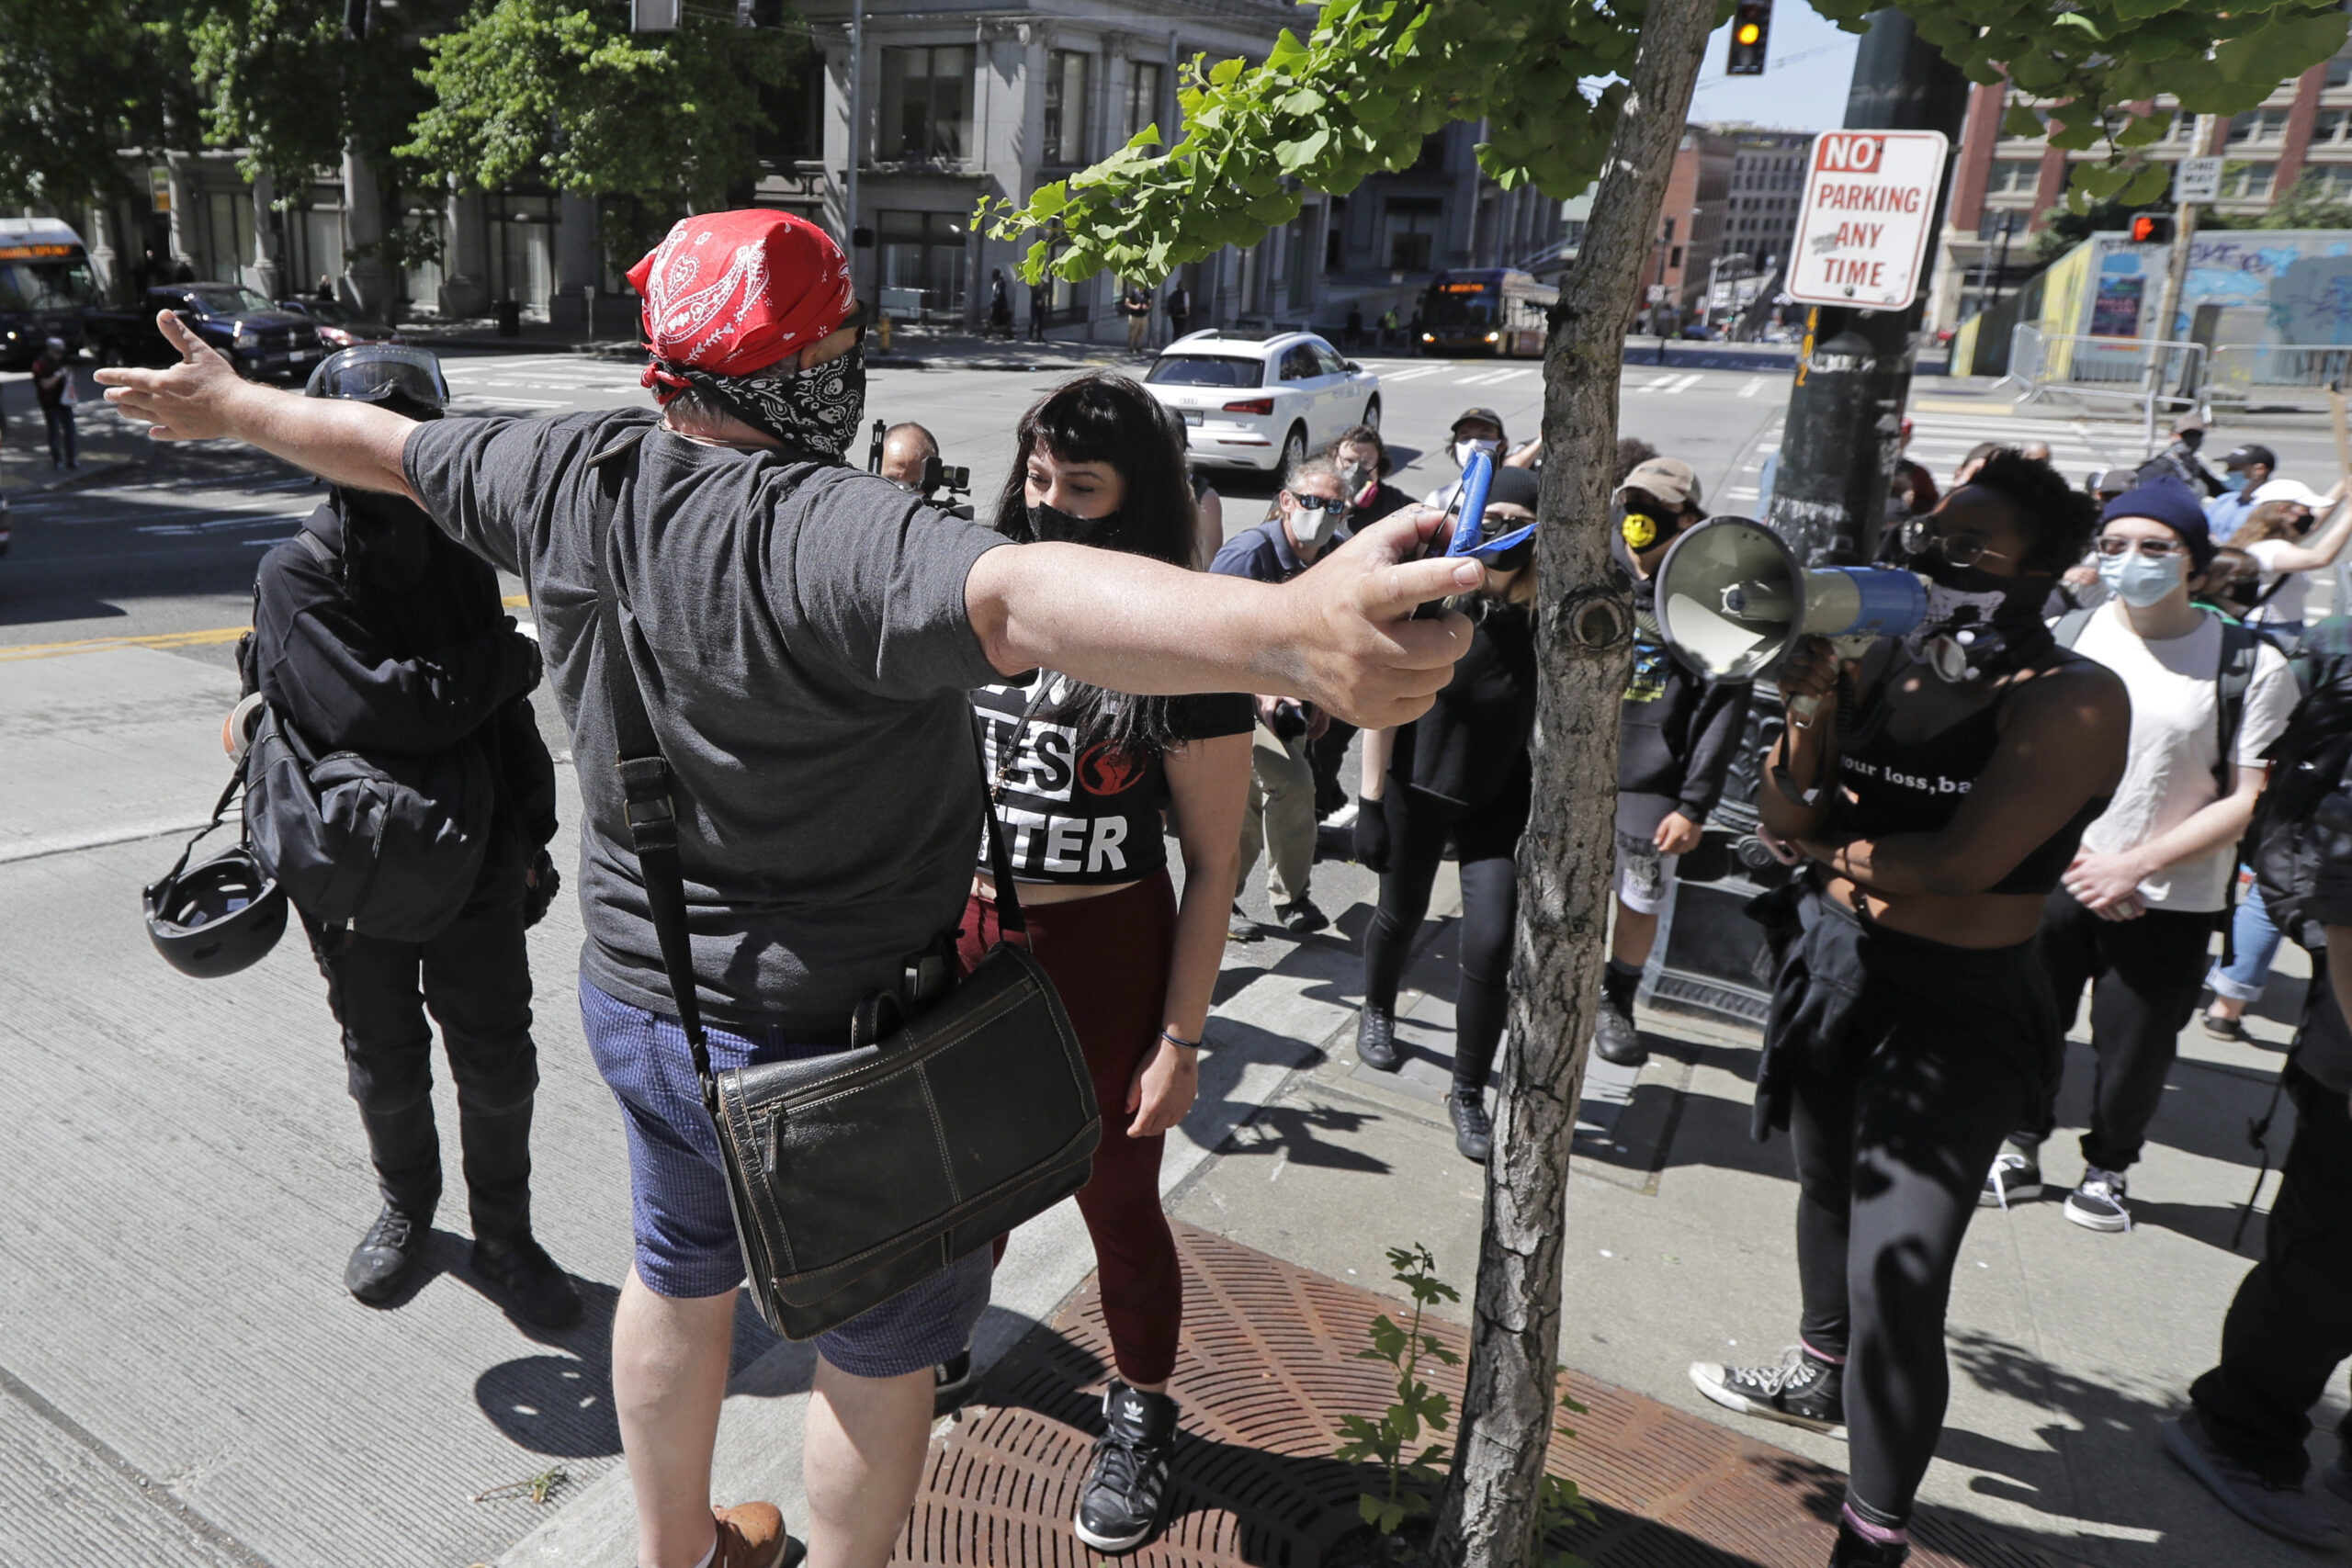 Protesters face off in Seattle, Washington